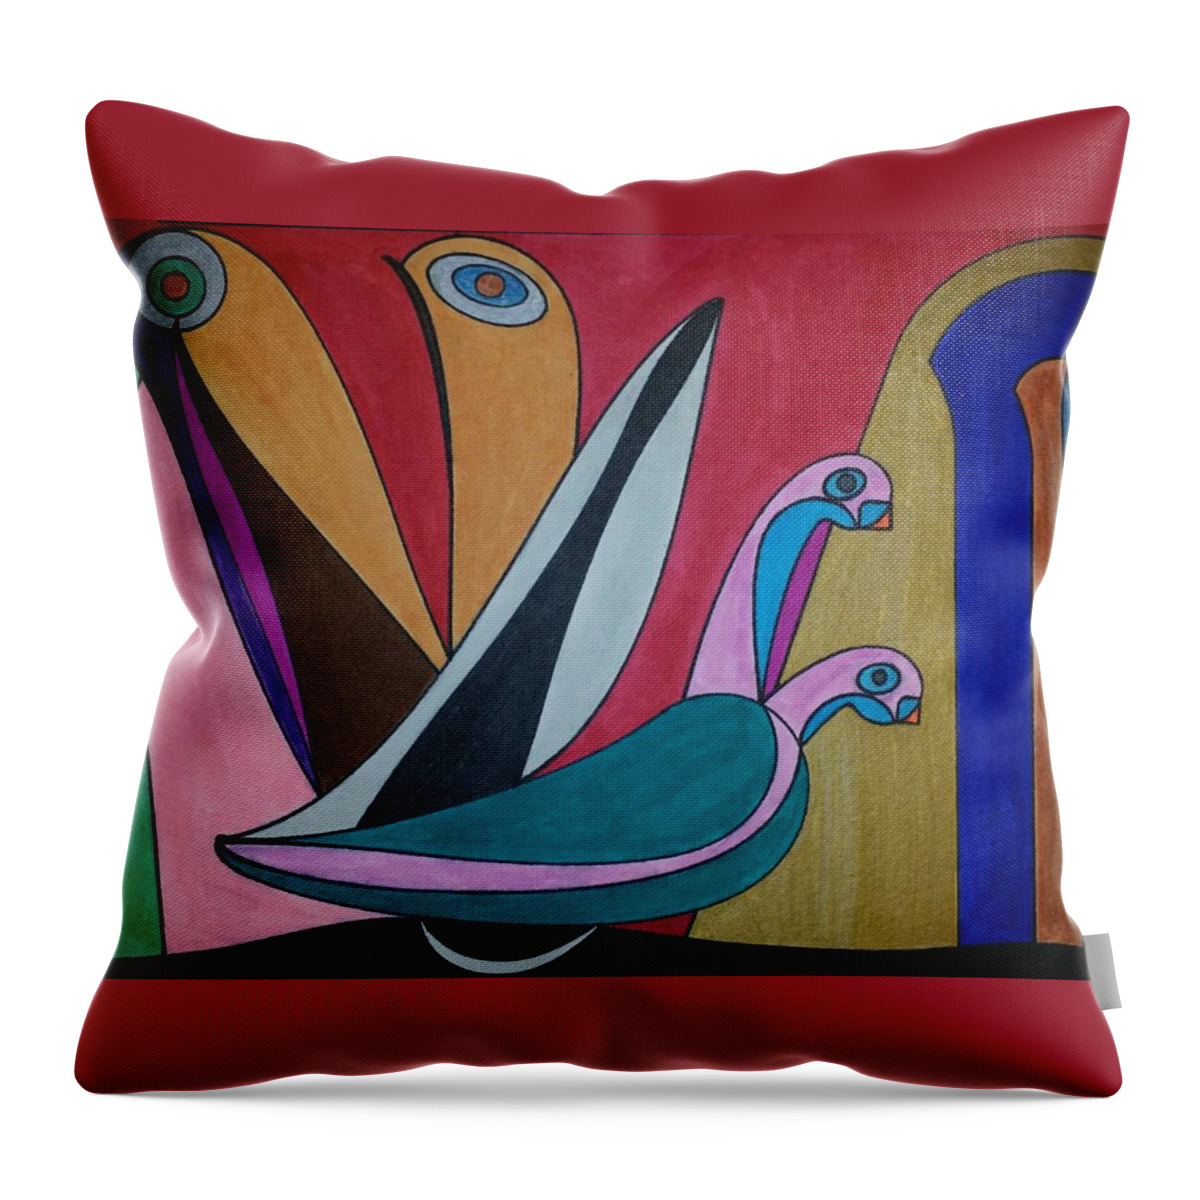 Geometric Art Throw Pillow featuring the glass art Dream 245 by S S-ray